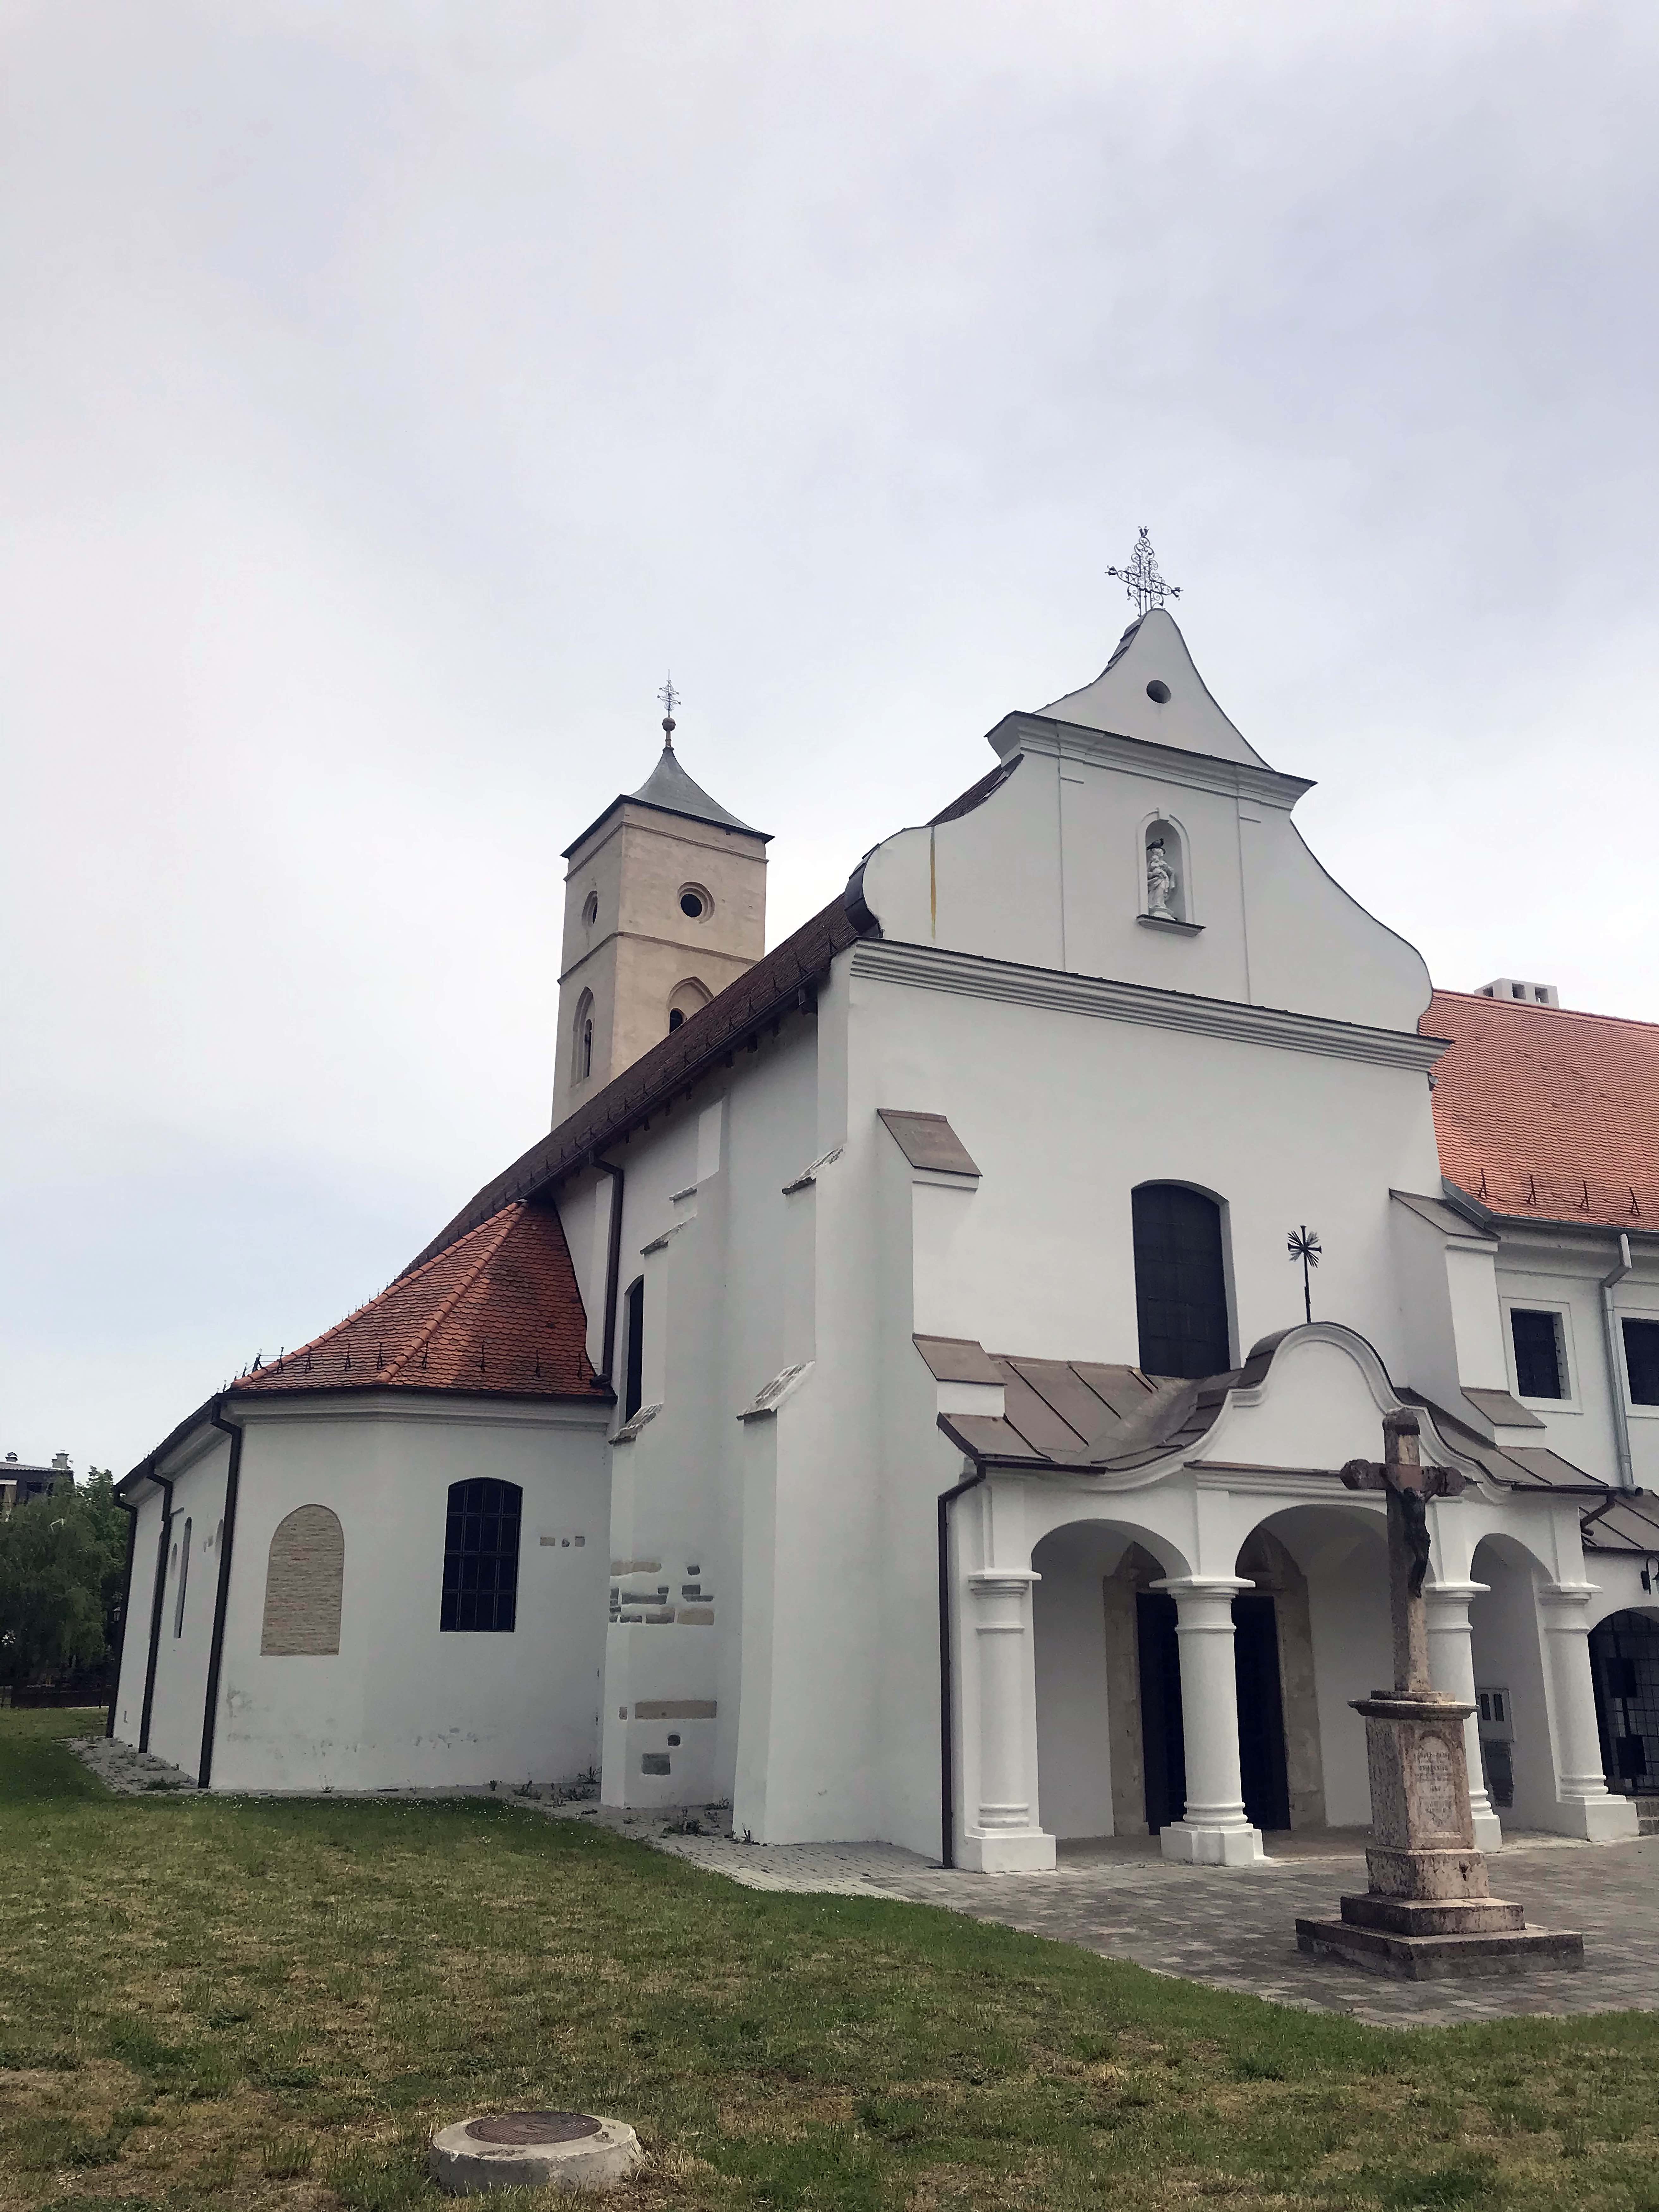 Church of the Assumption of the Blessed Virgin Mary in Bač, view from the northwest side (source: N. Piperski)